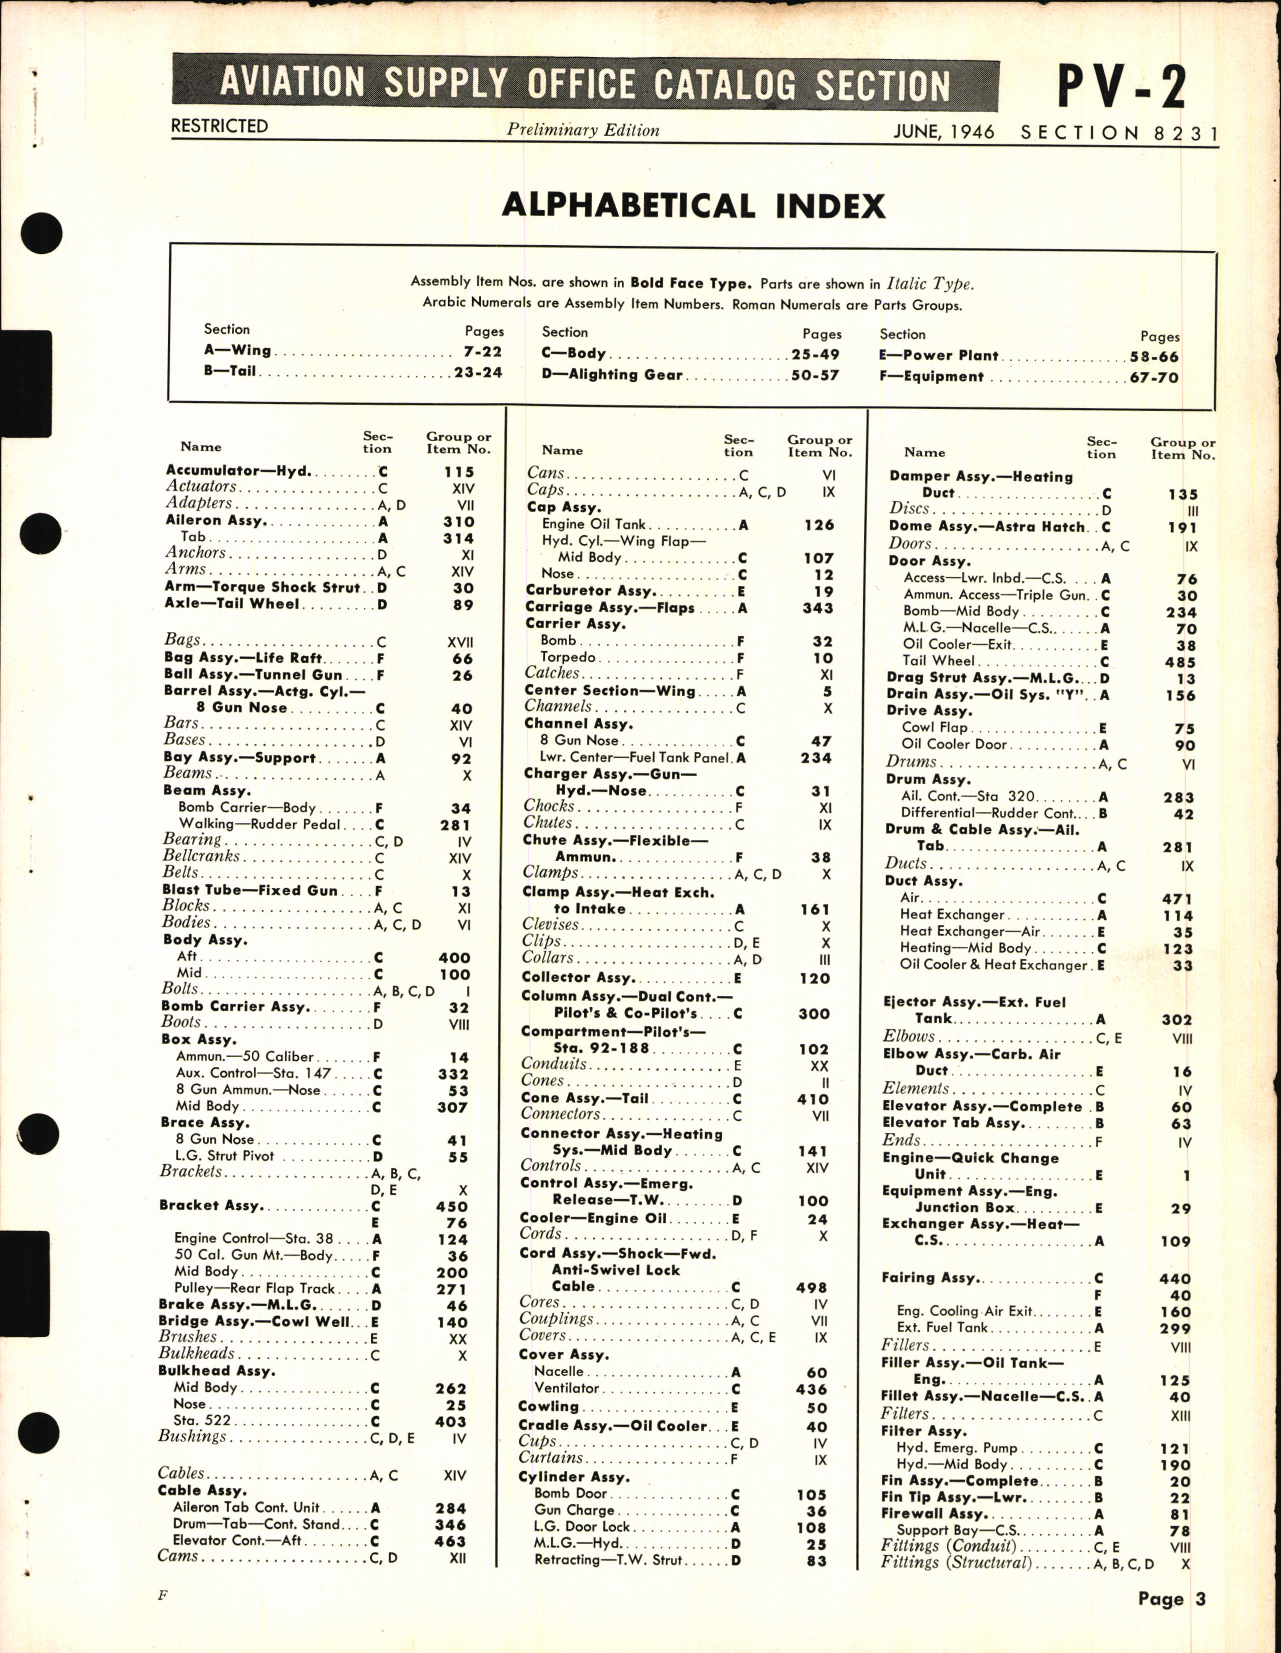 Sample page 3 from AirCorps Library document: PV-2 Harpoon Availability List and Airframe Spare Parts